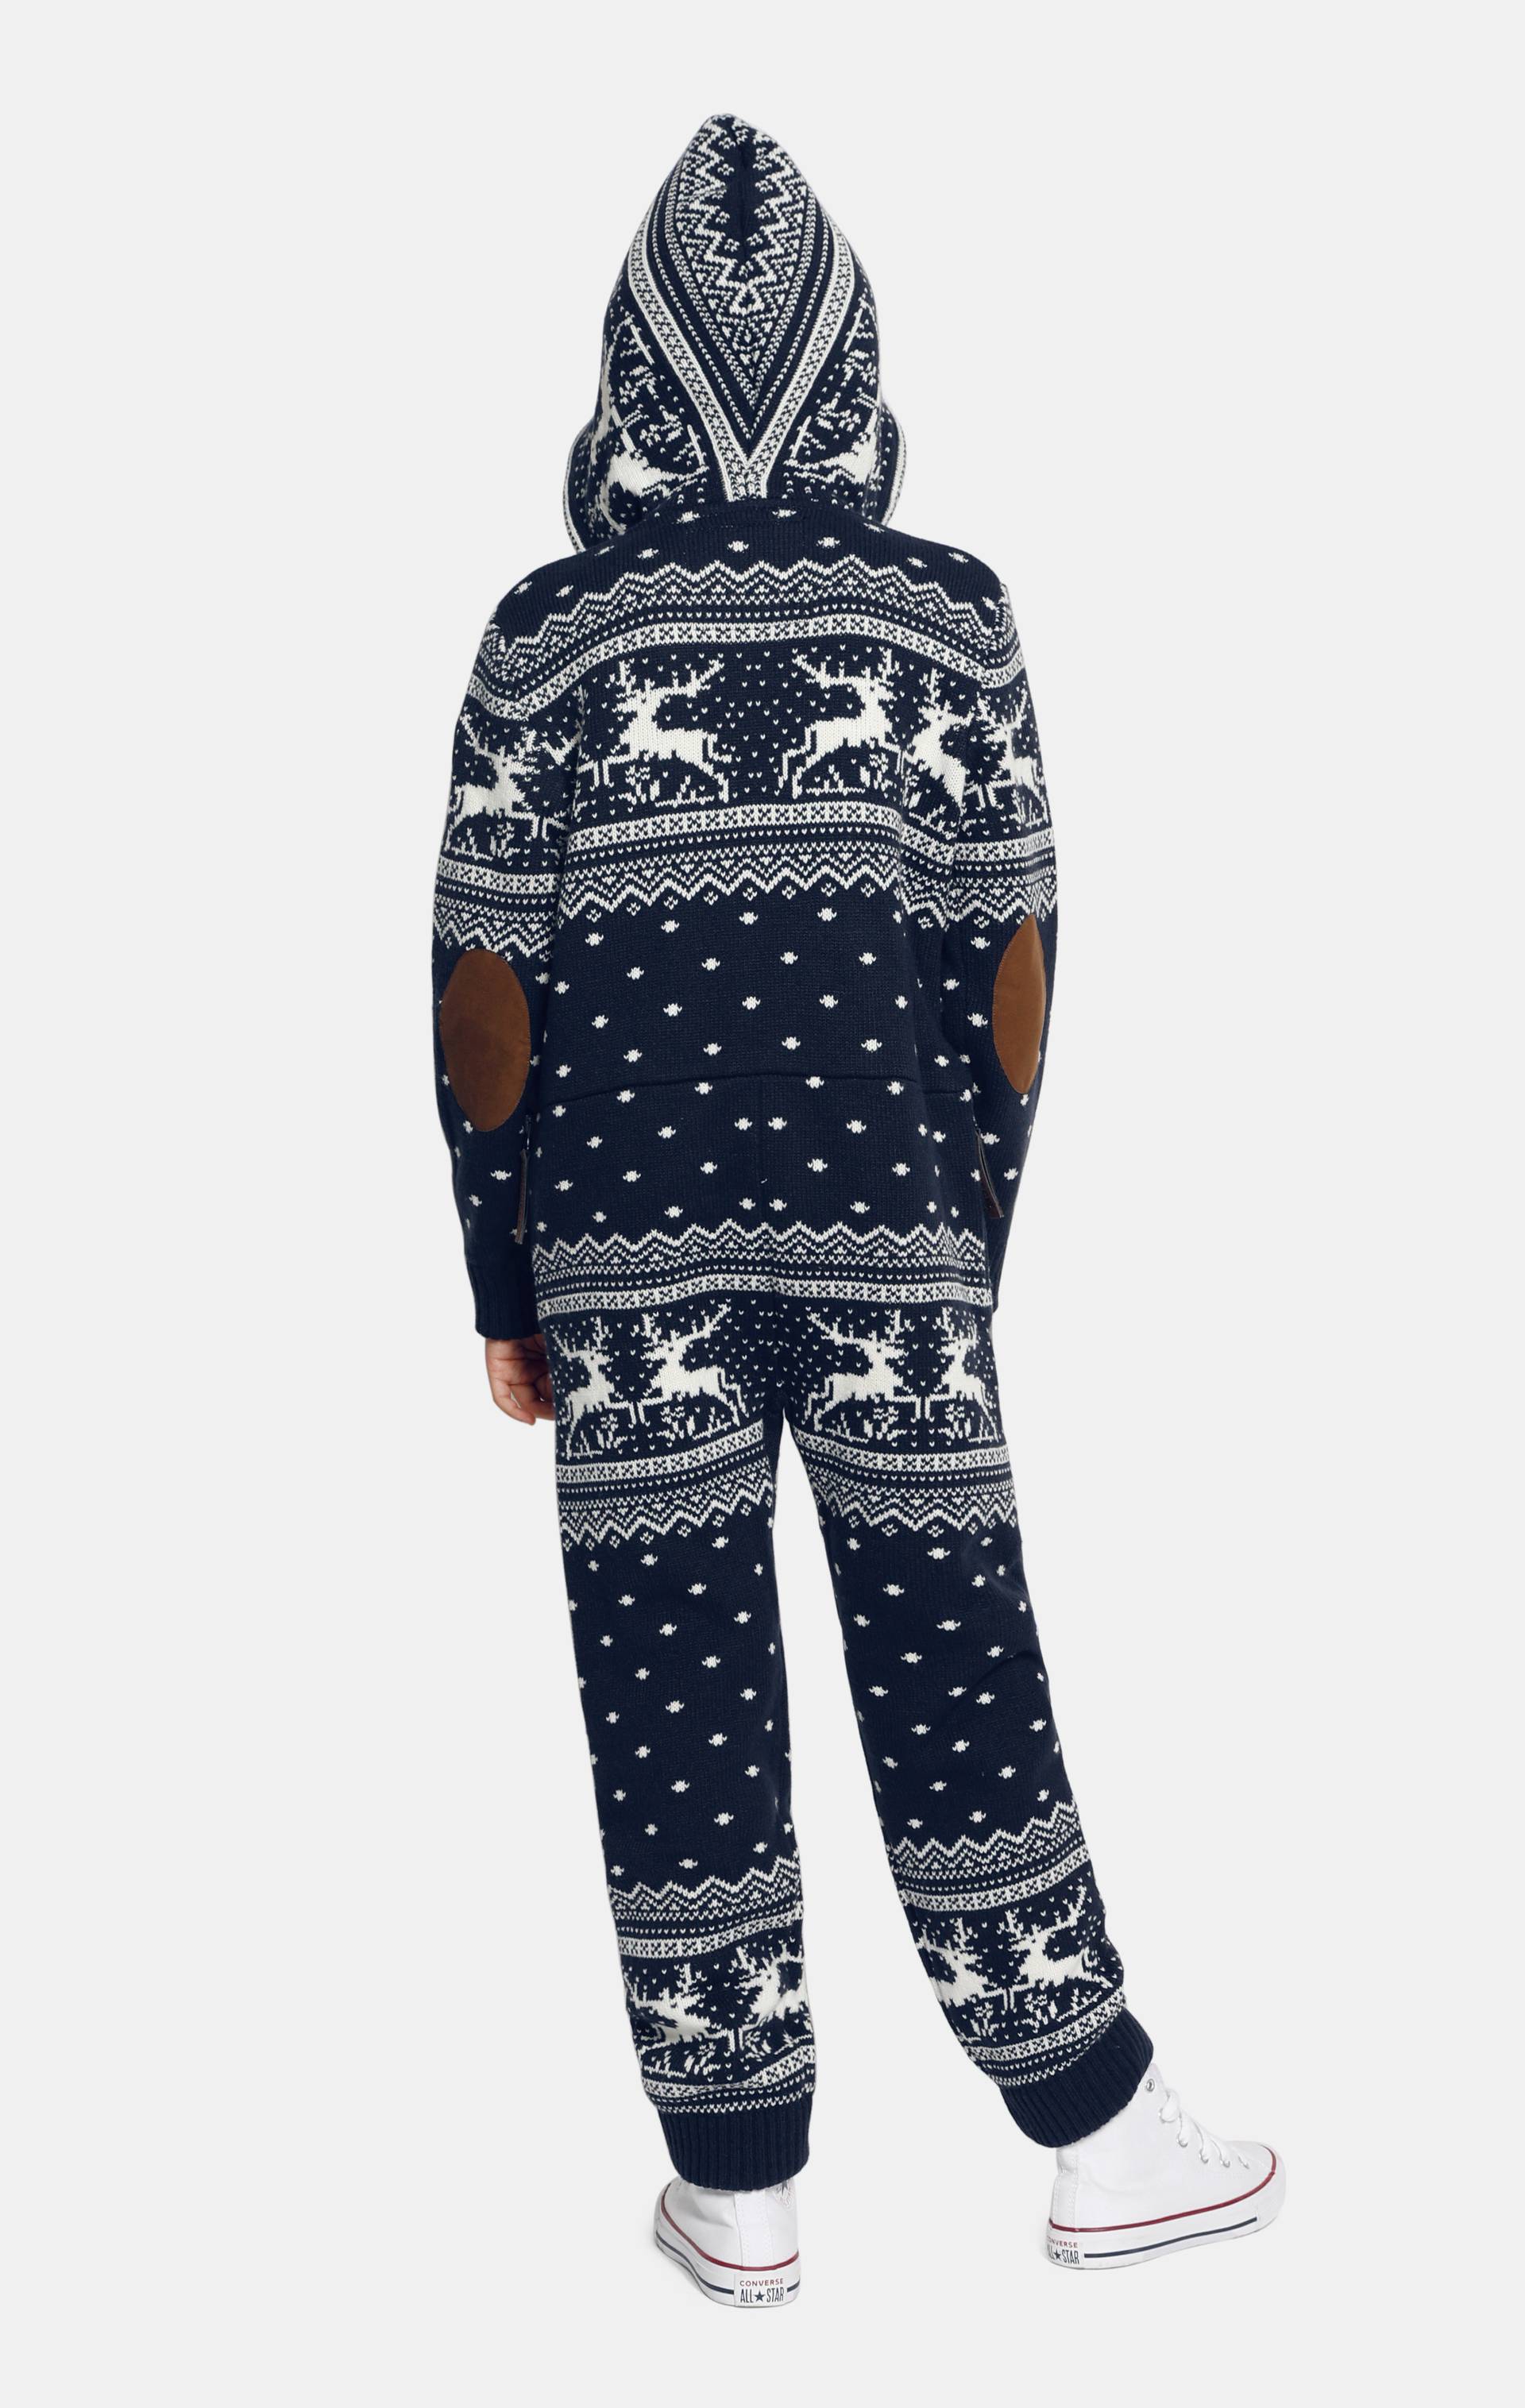 Onepiece Holidays Are Coming KIDS Onesie Jumpsuit Navy - 4